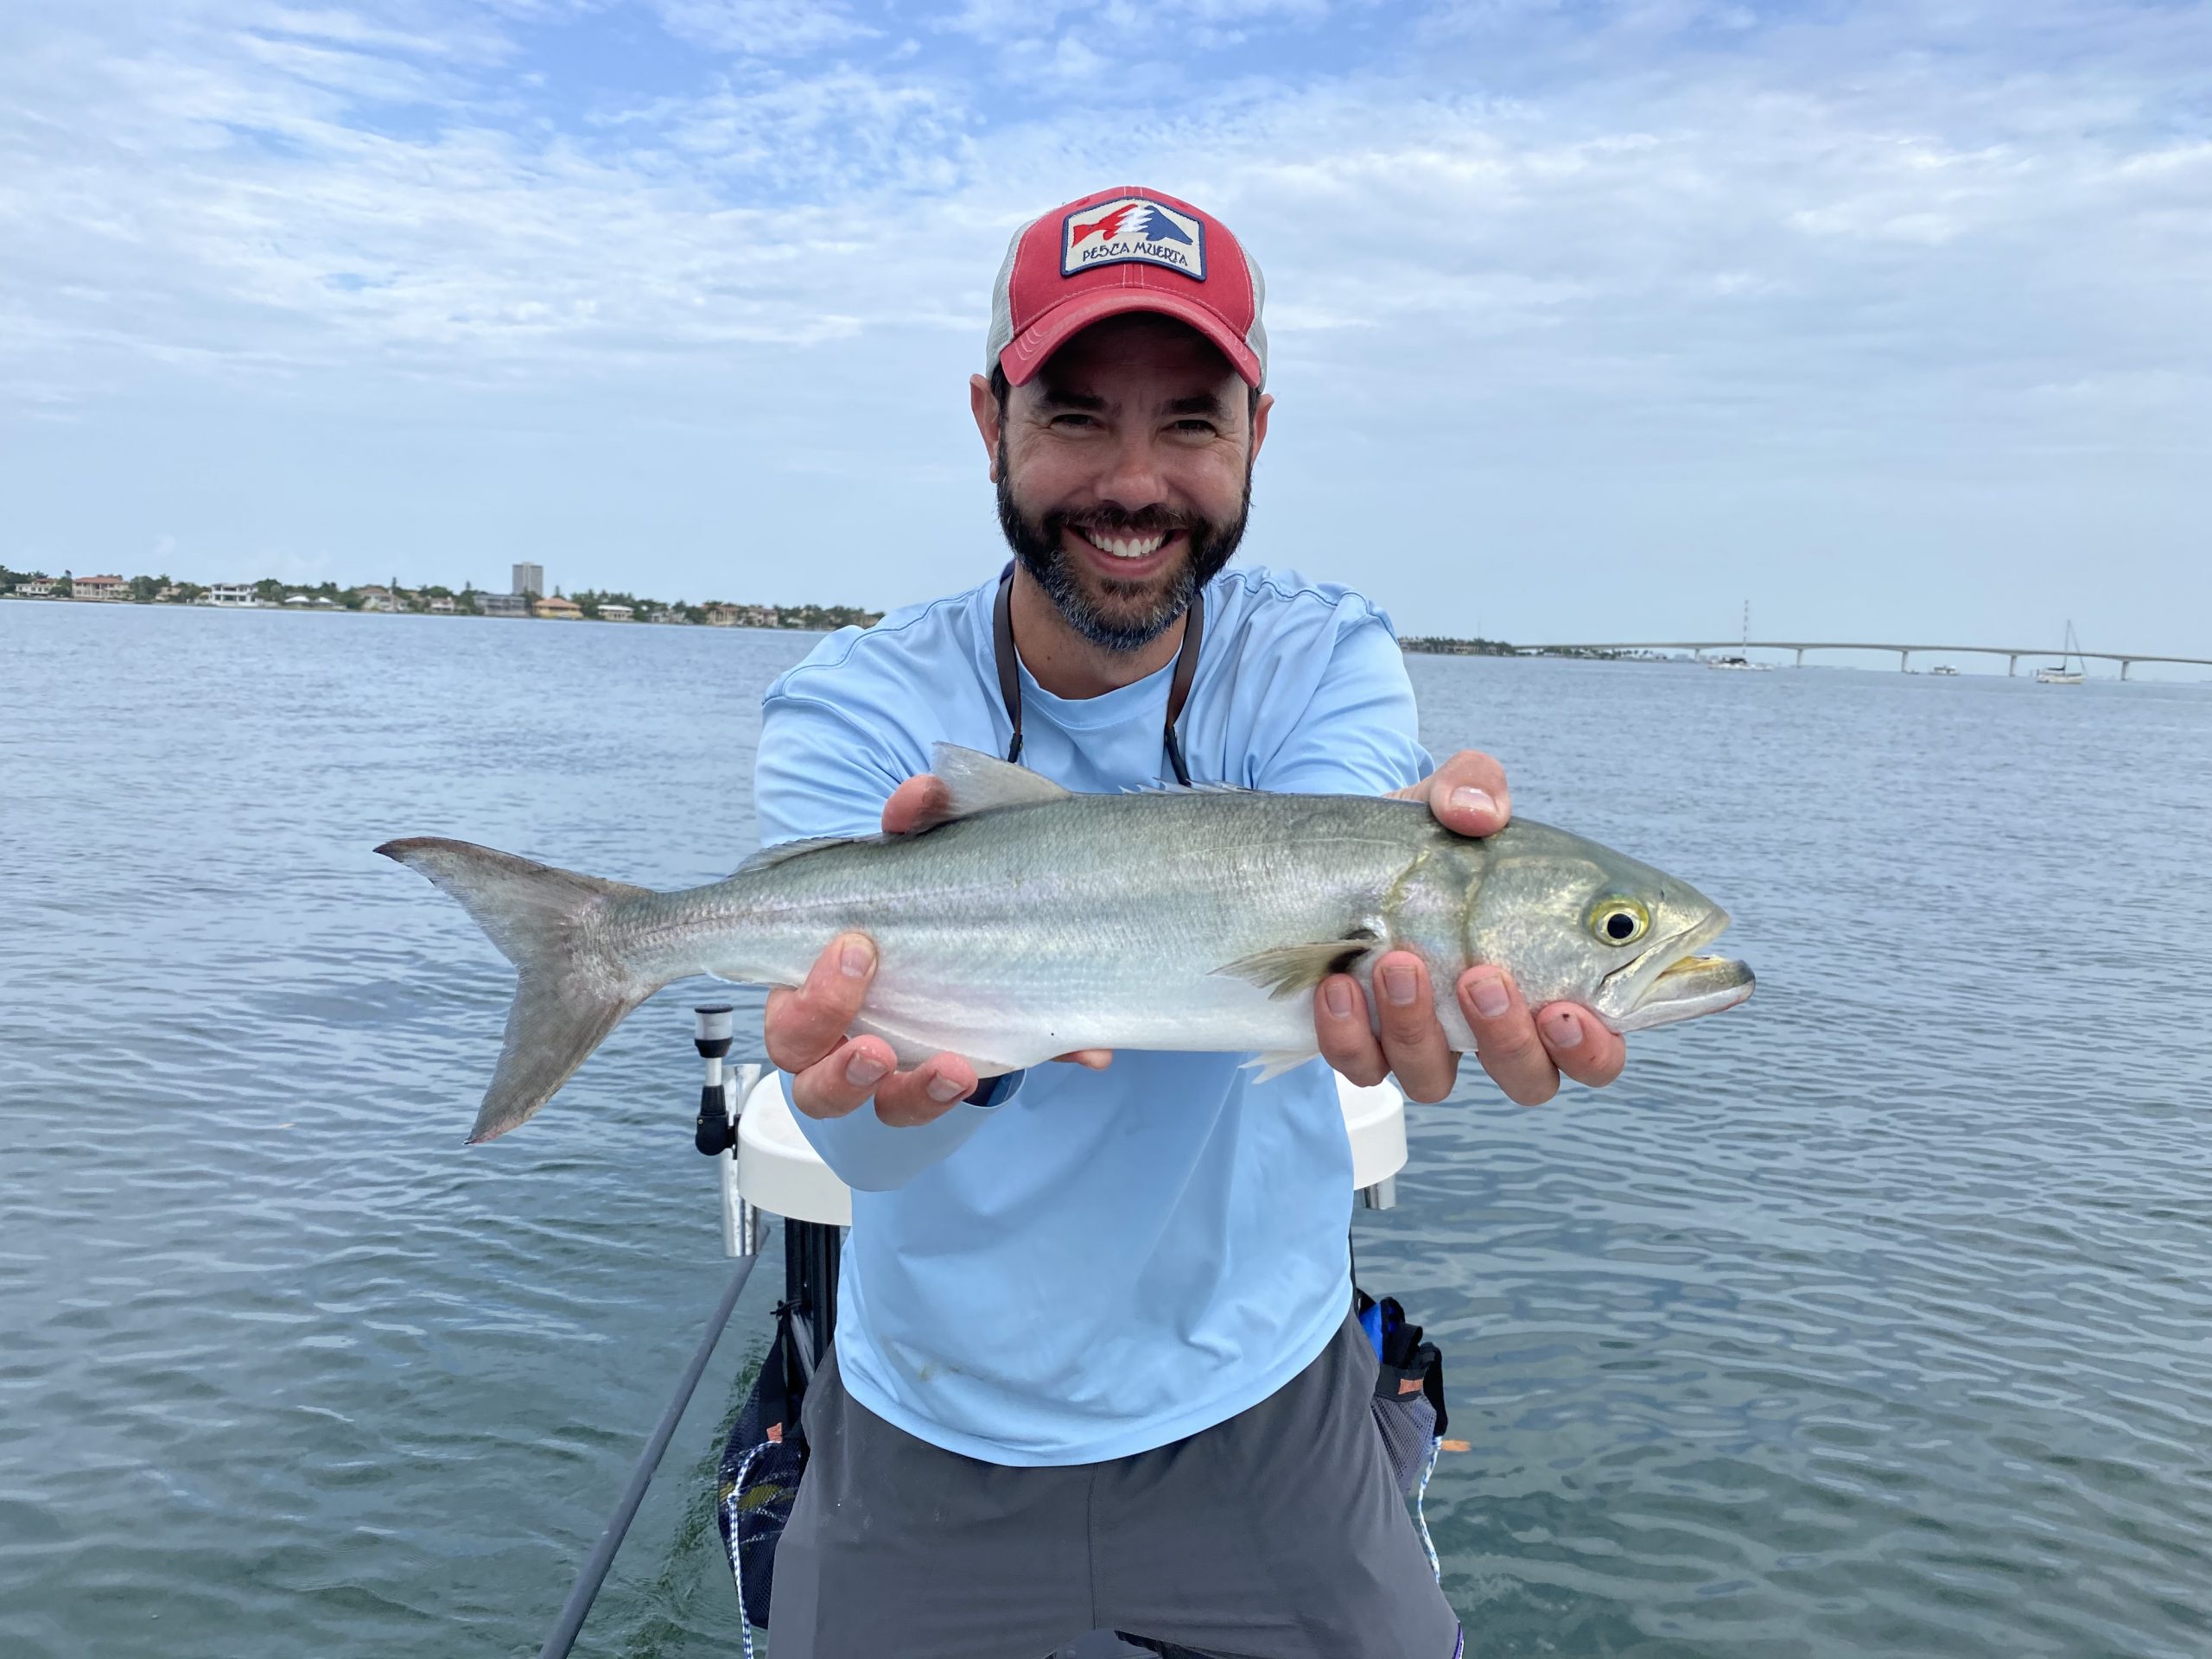 An angler holds out a bluefish for the camera